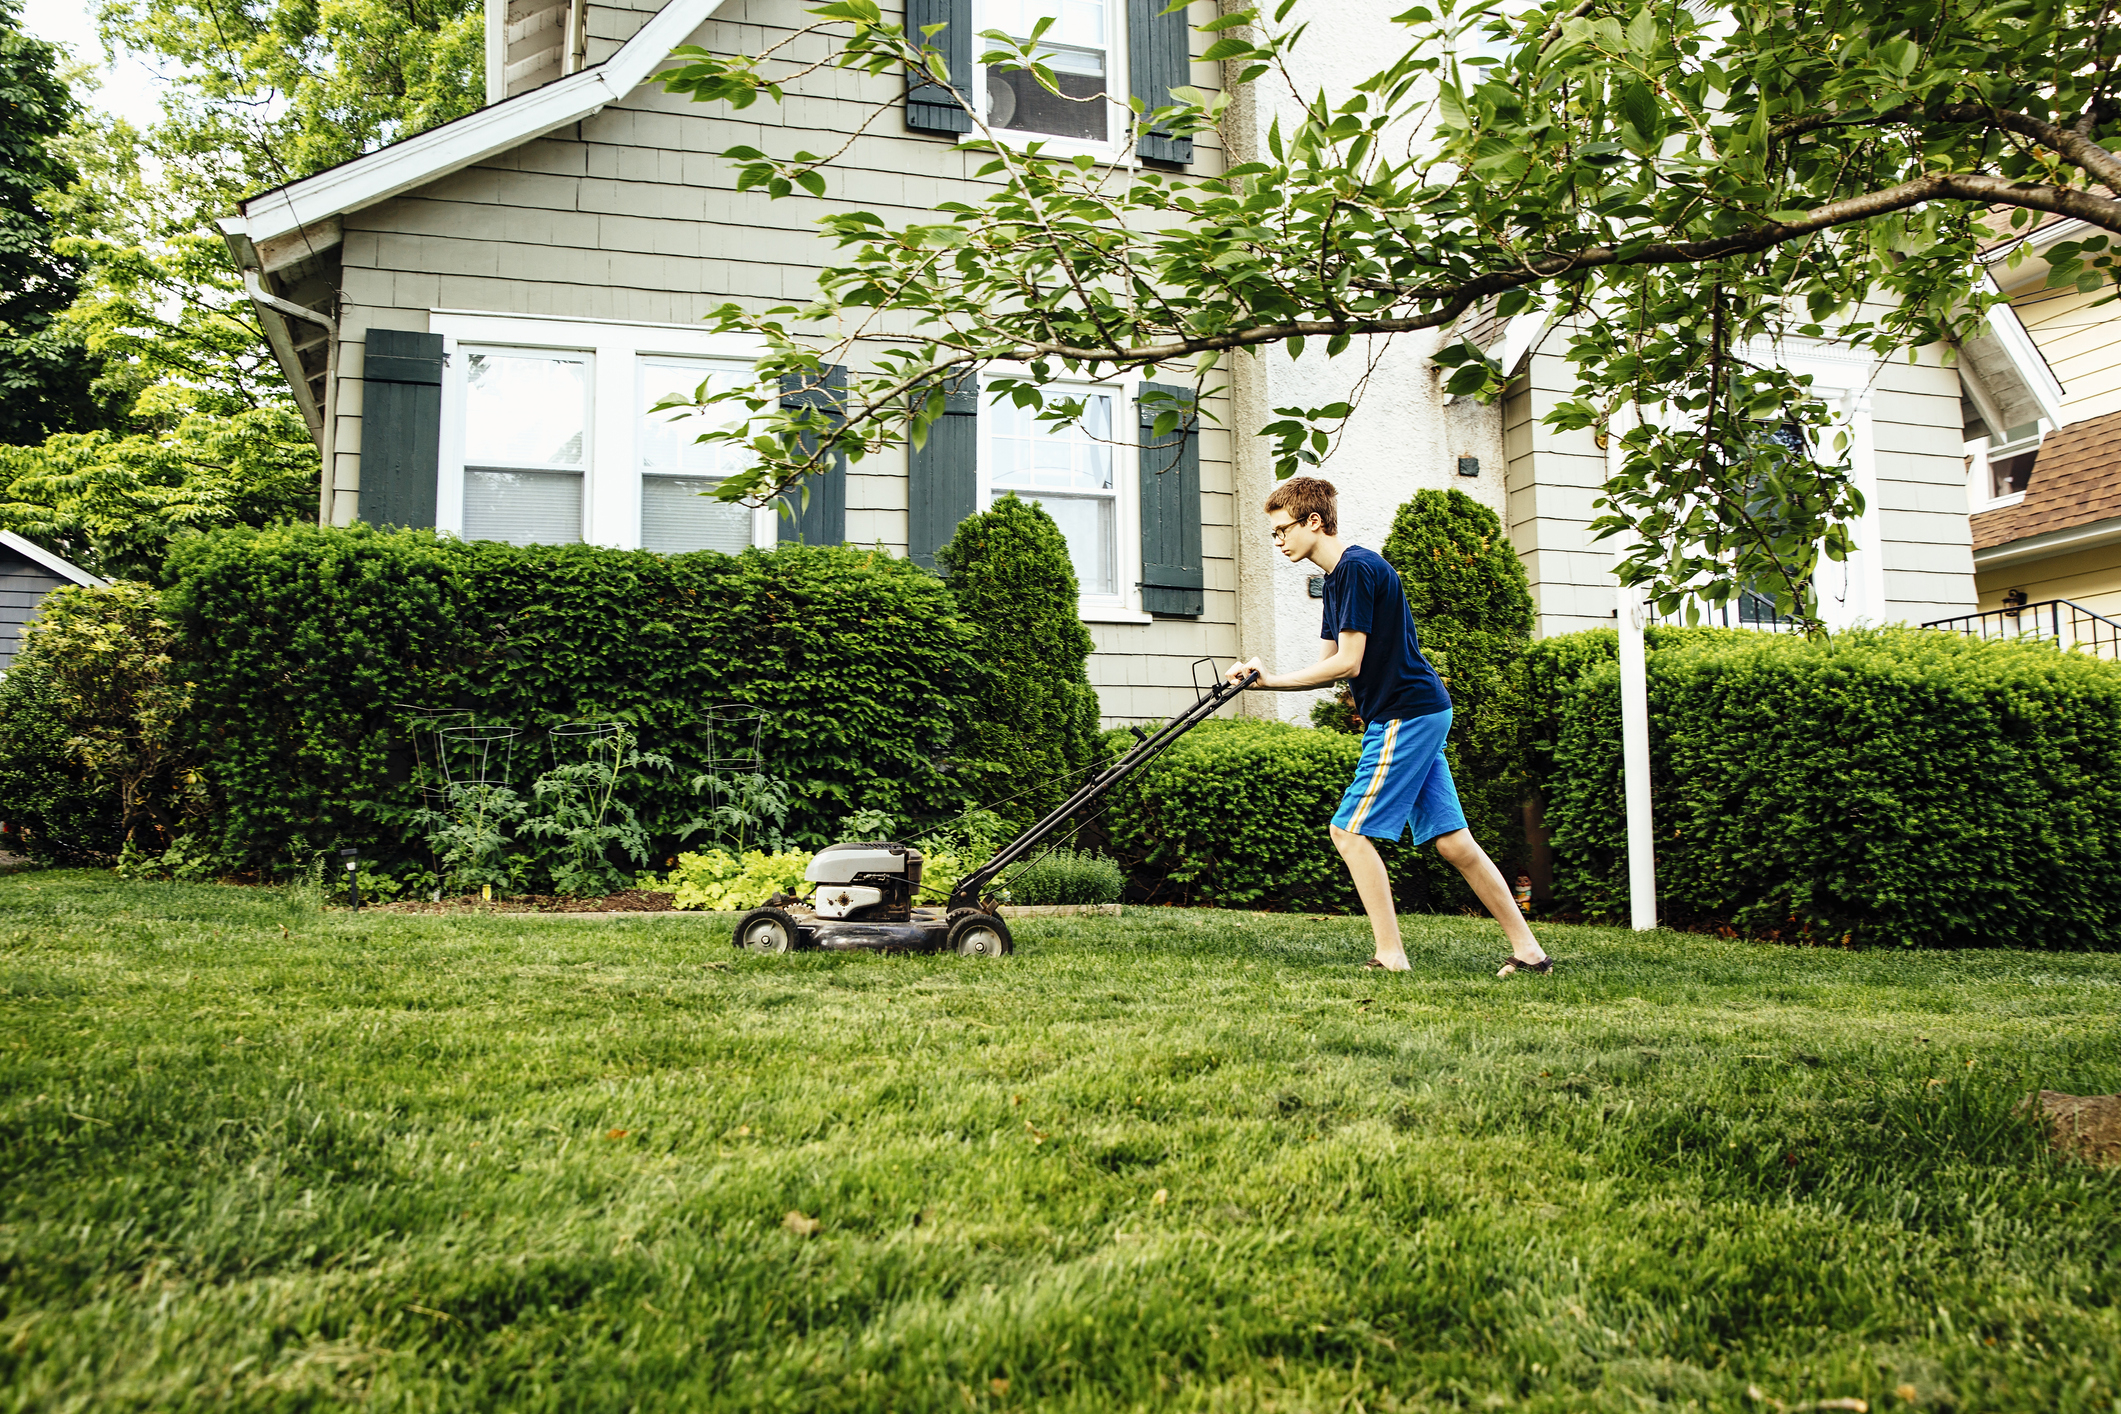 A teenage boy is mowing the lawn